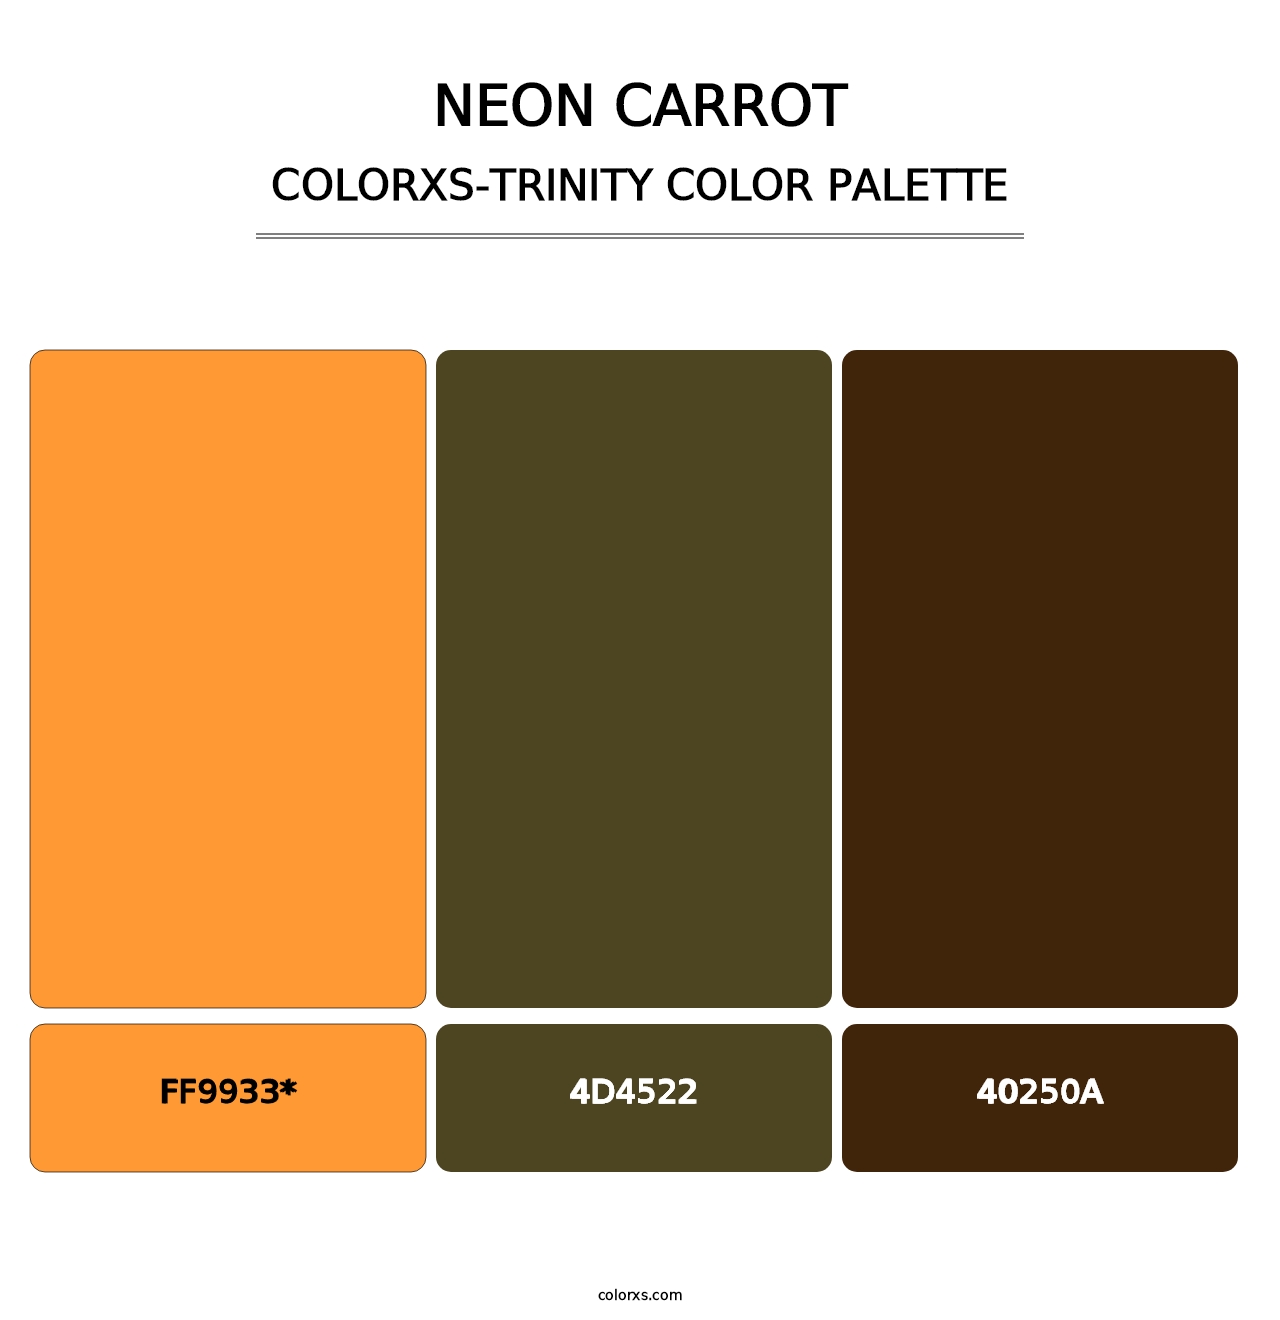 Neon Carrot - Colorxs Trinity Palette